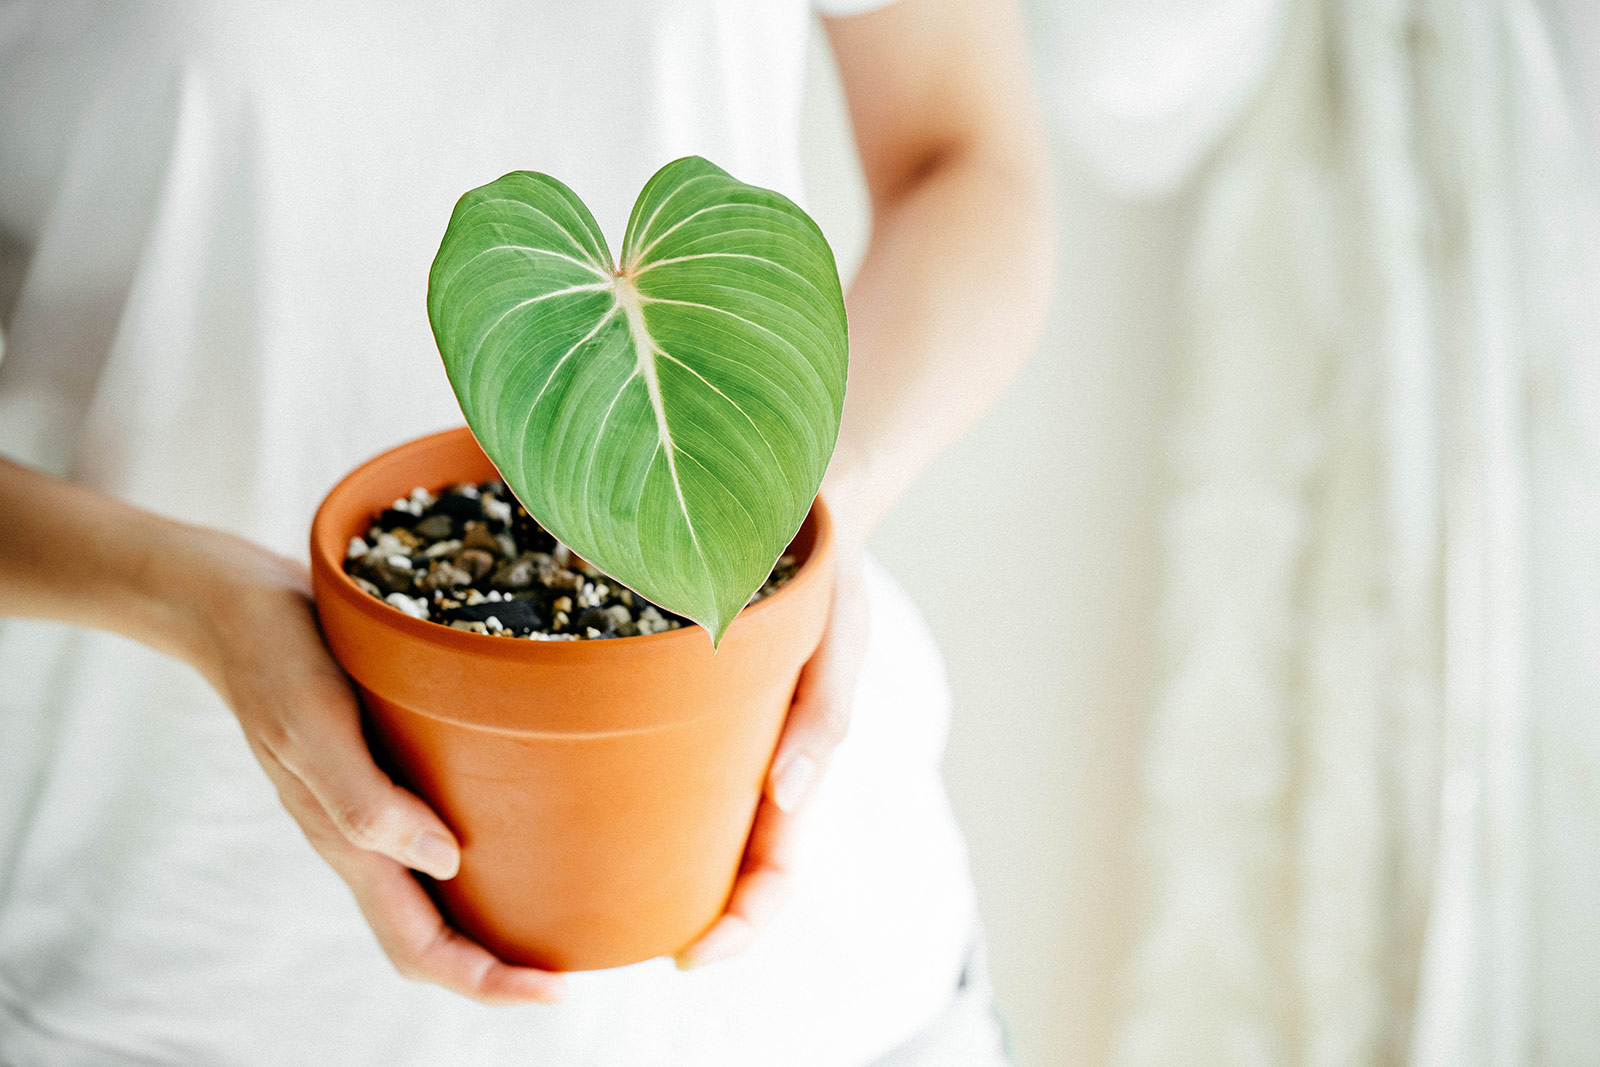 Woman's hands holding a small Philodendron gloriosum plant in a terracotta pot